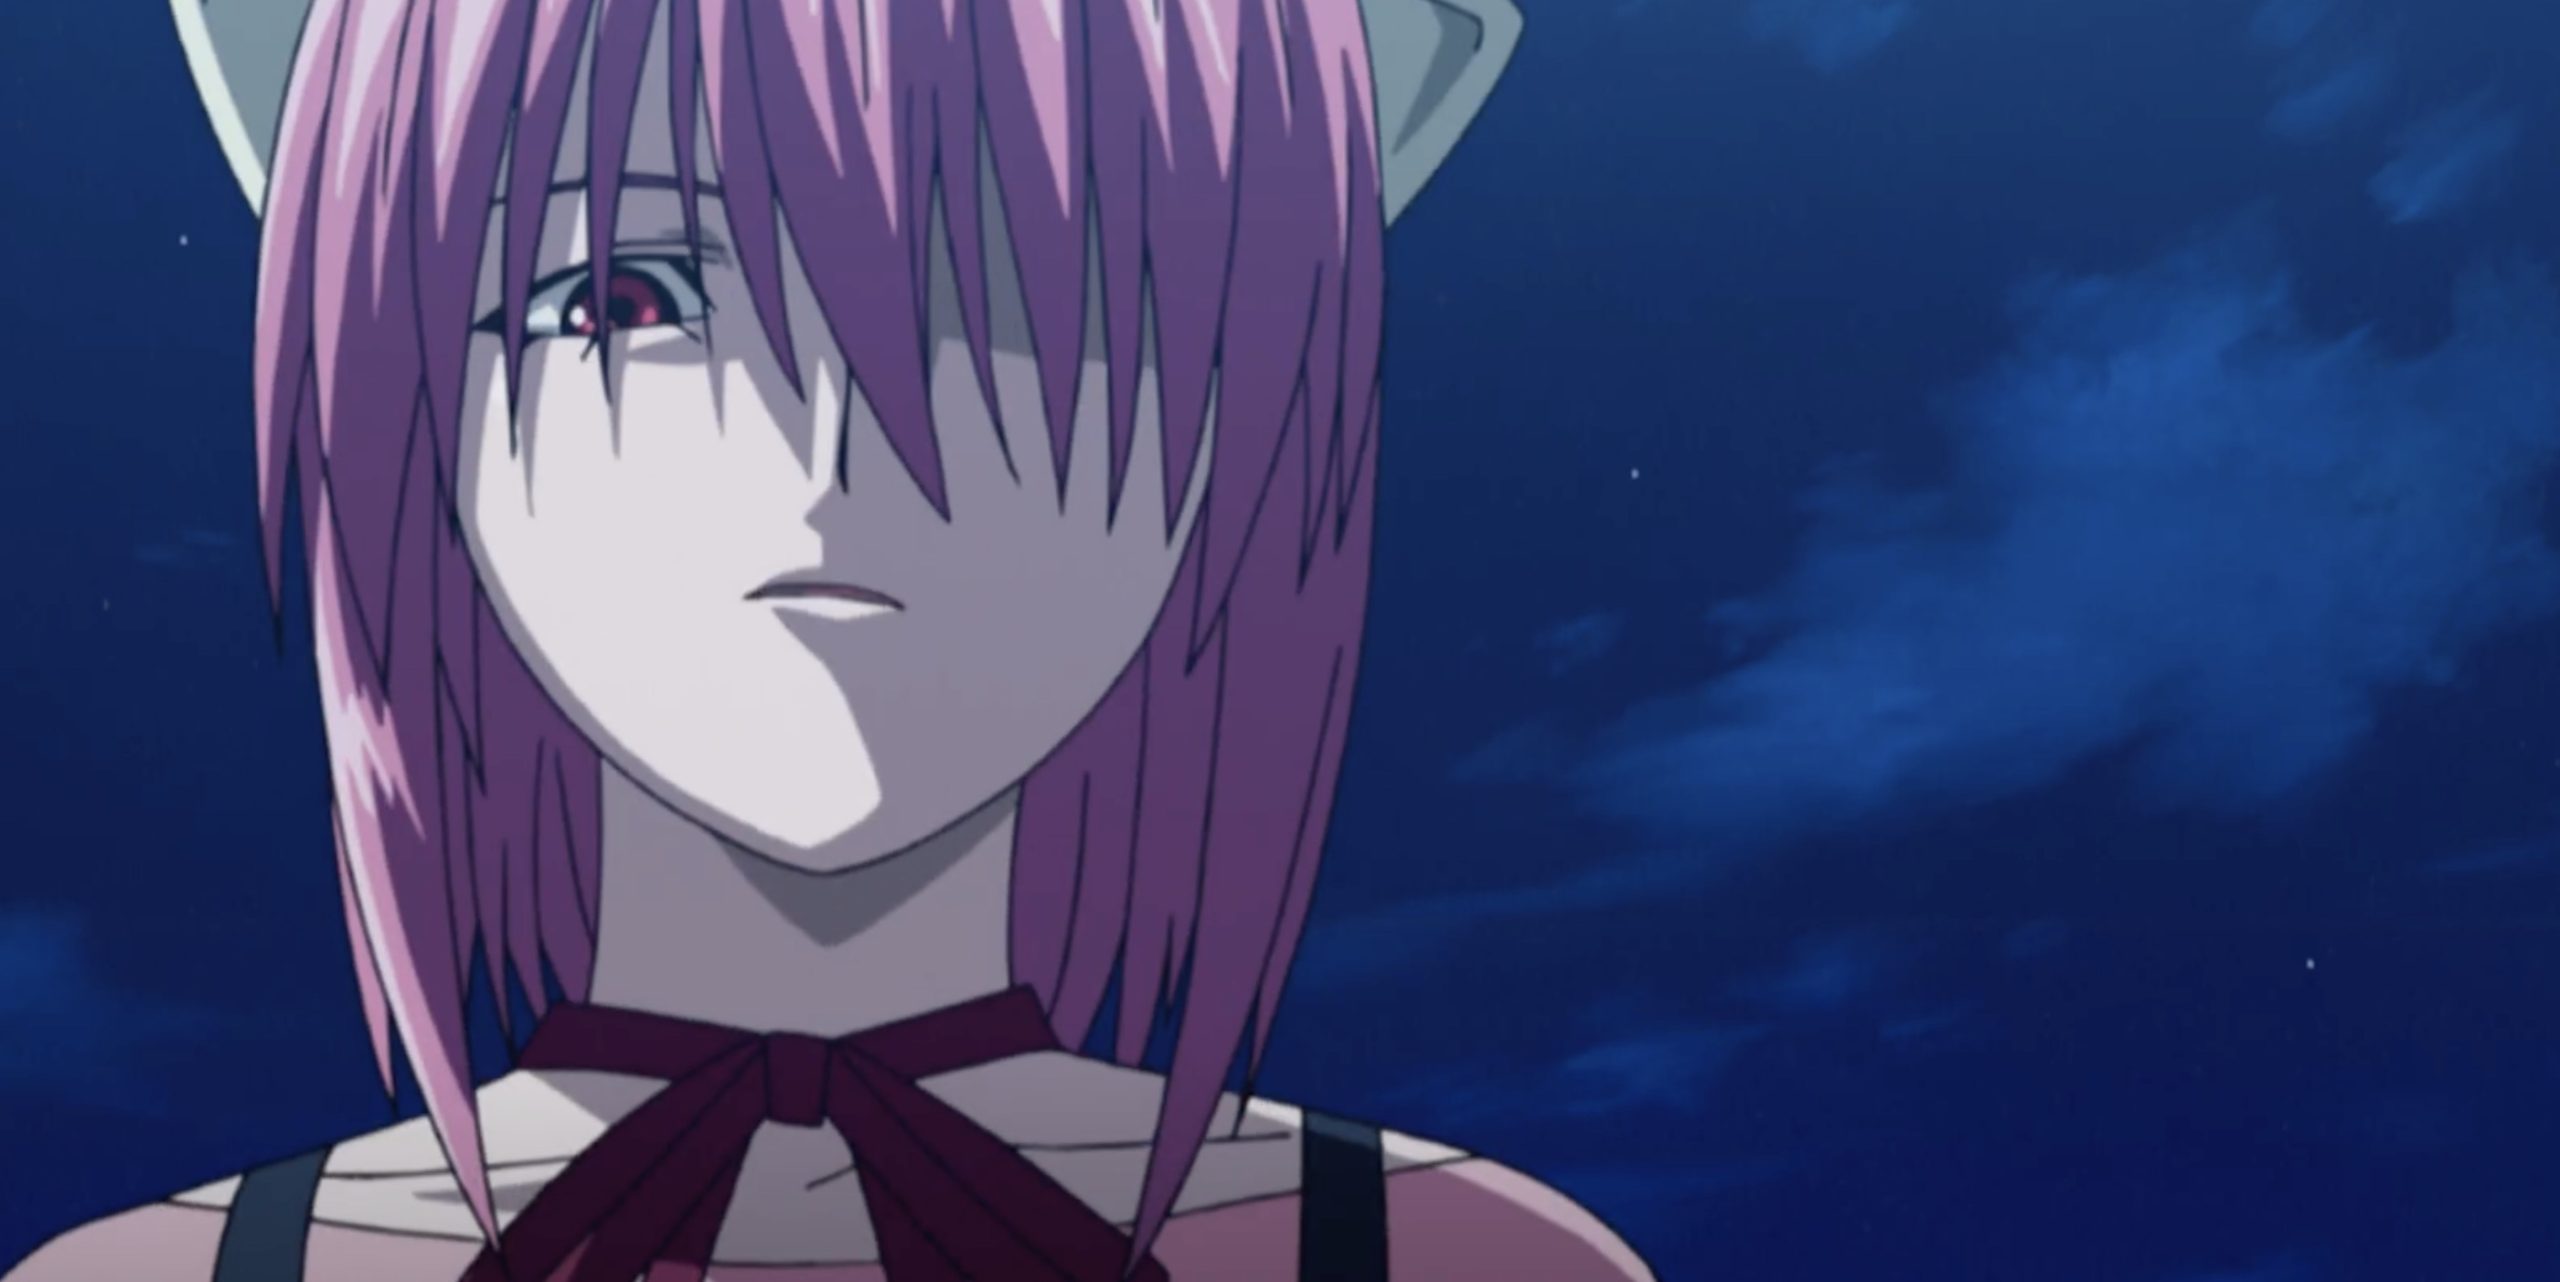 1707827673 480 The Real Reason Why Fans Hate The Elfen Lied Anime